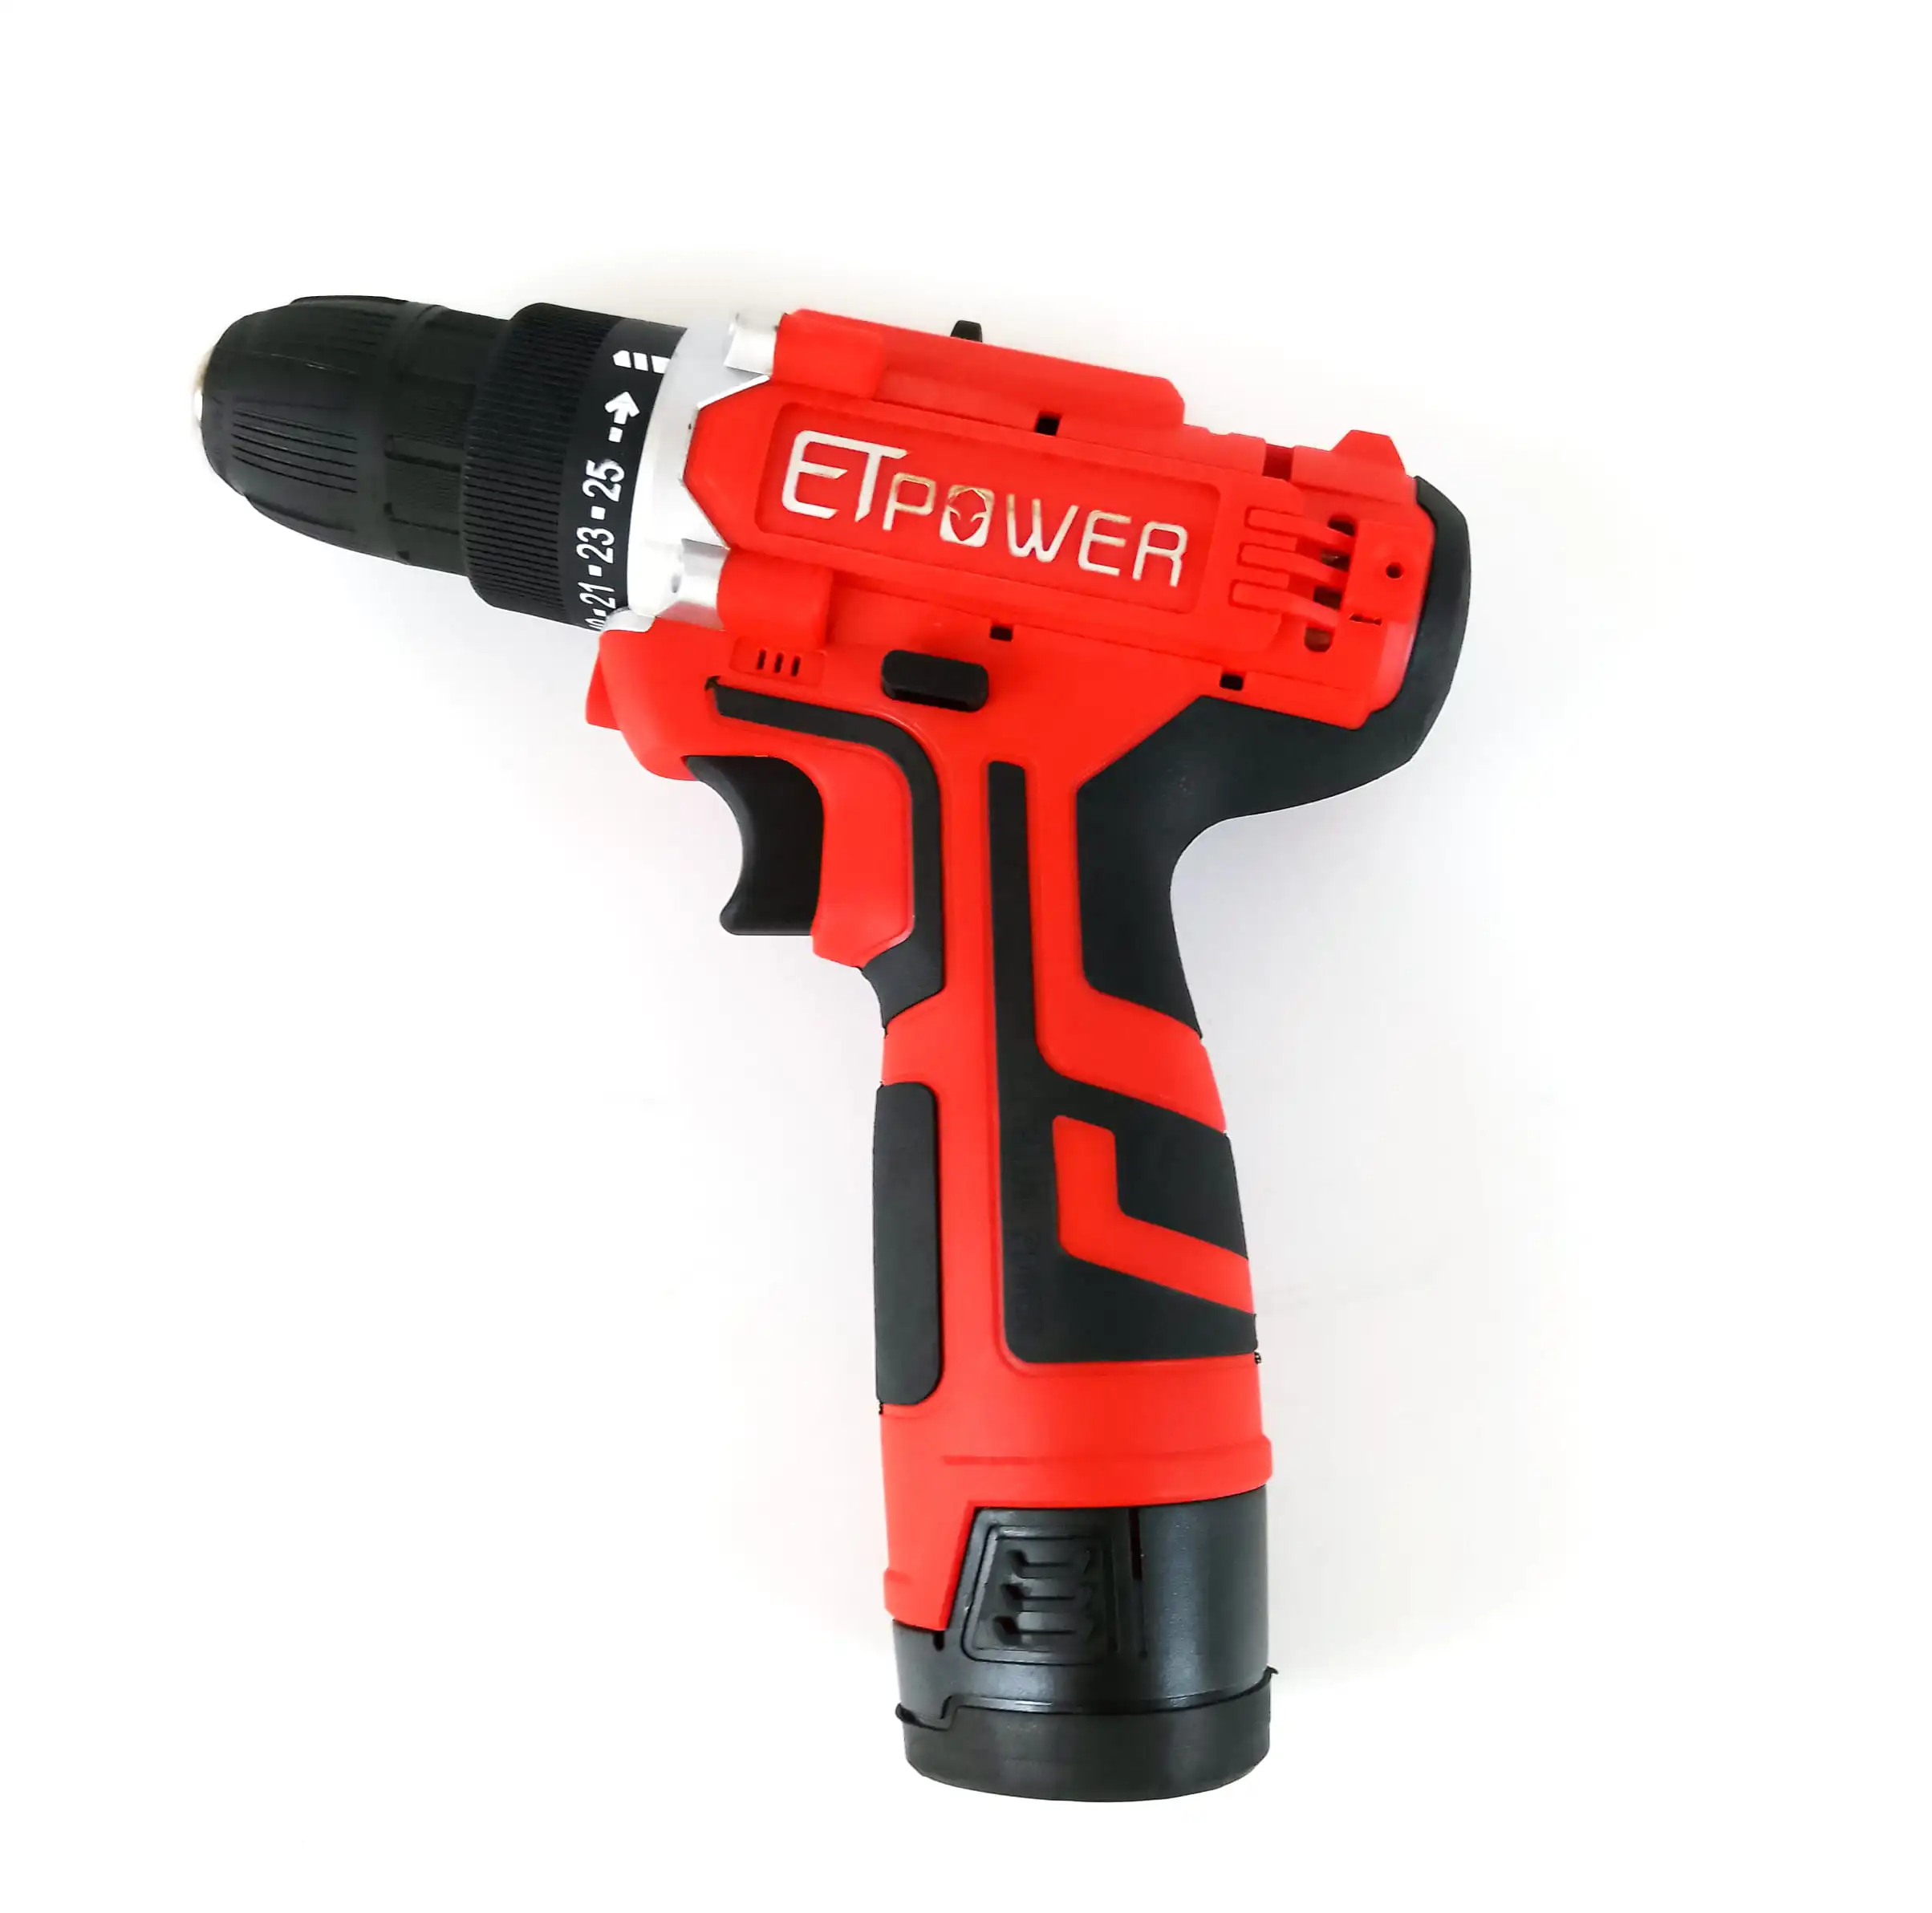 12v cordless drill driver with 2